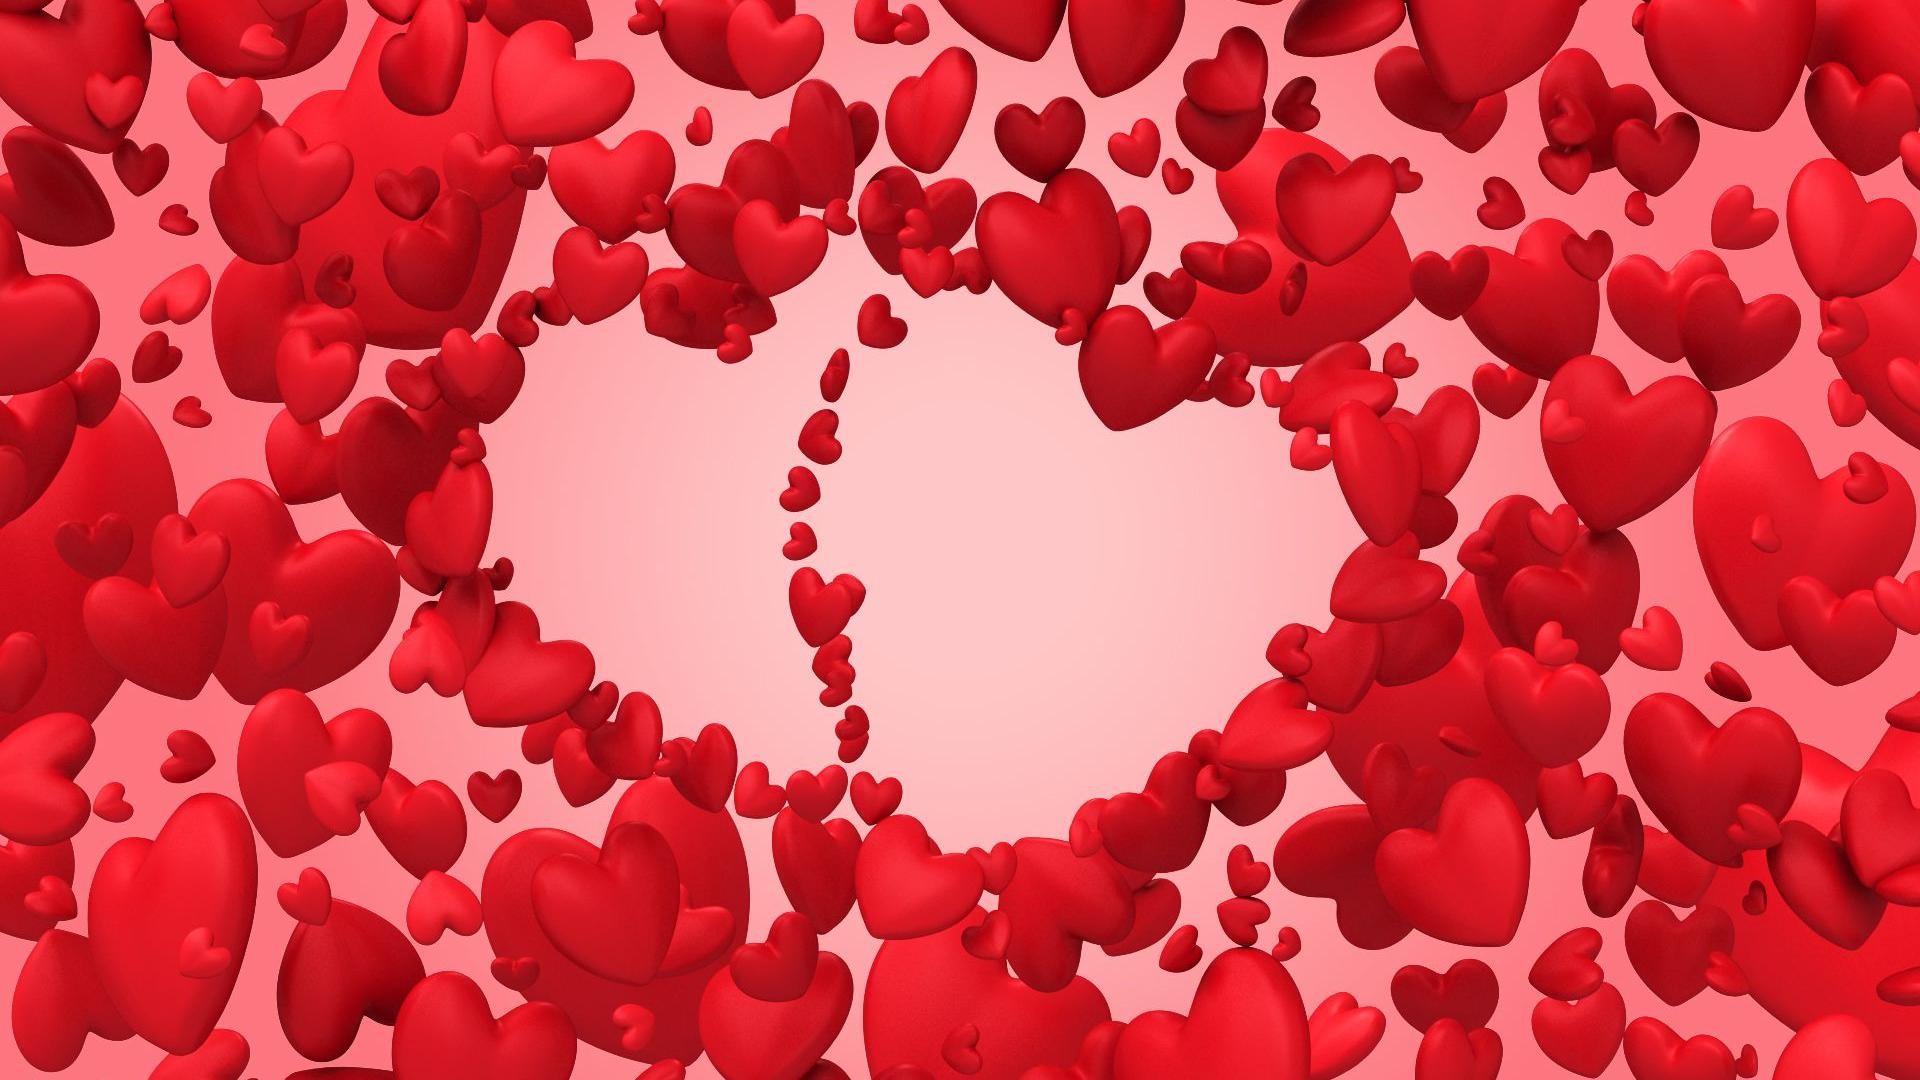 Awesome Hearts Wallpaper 1920x1080